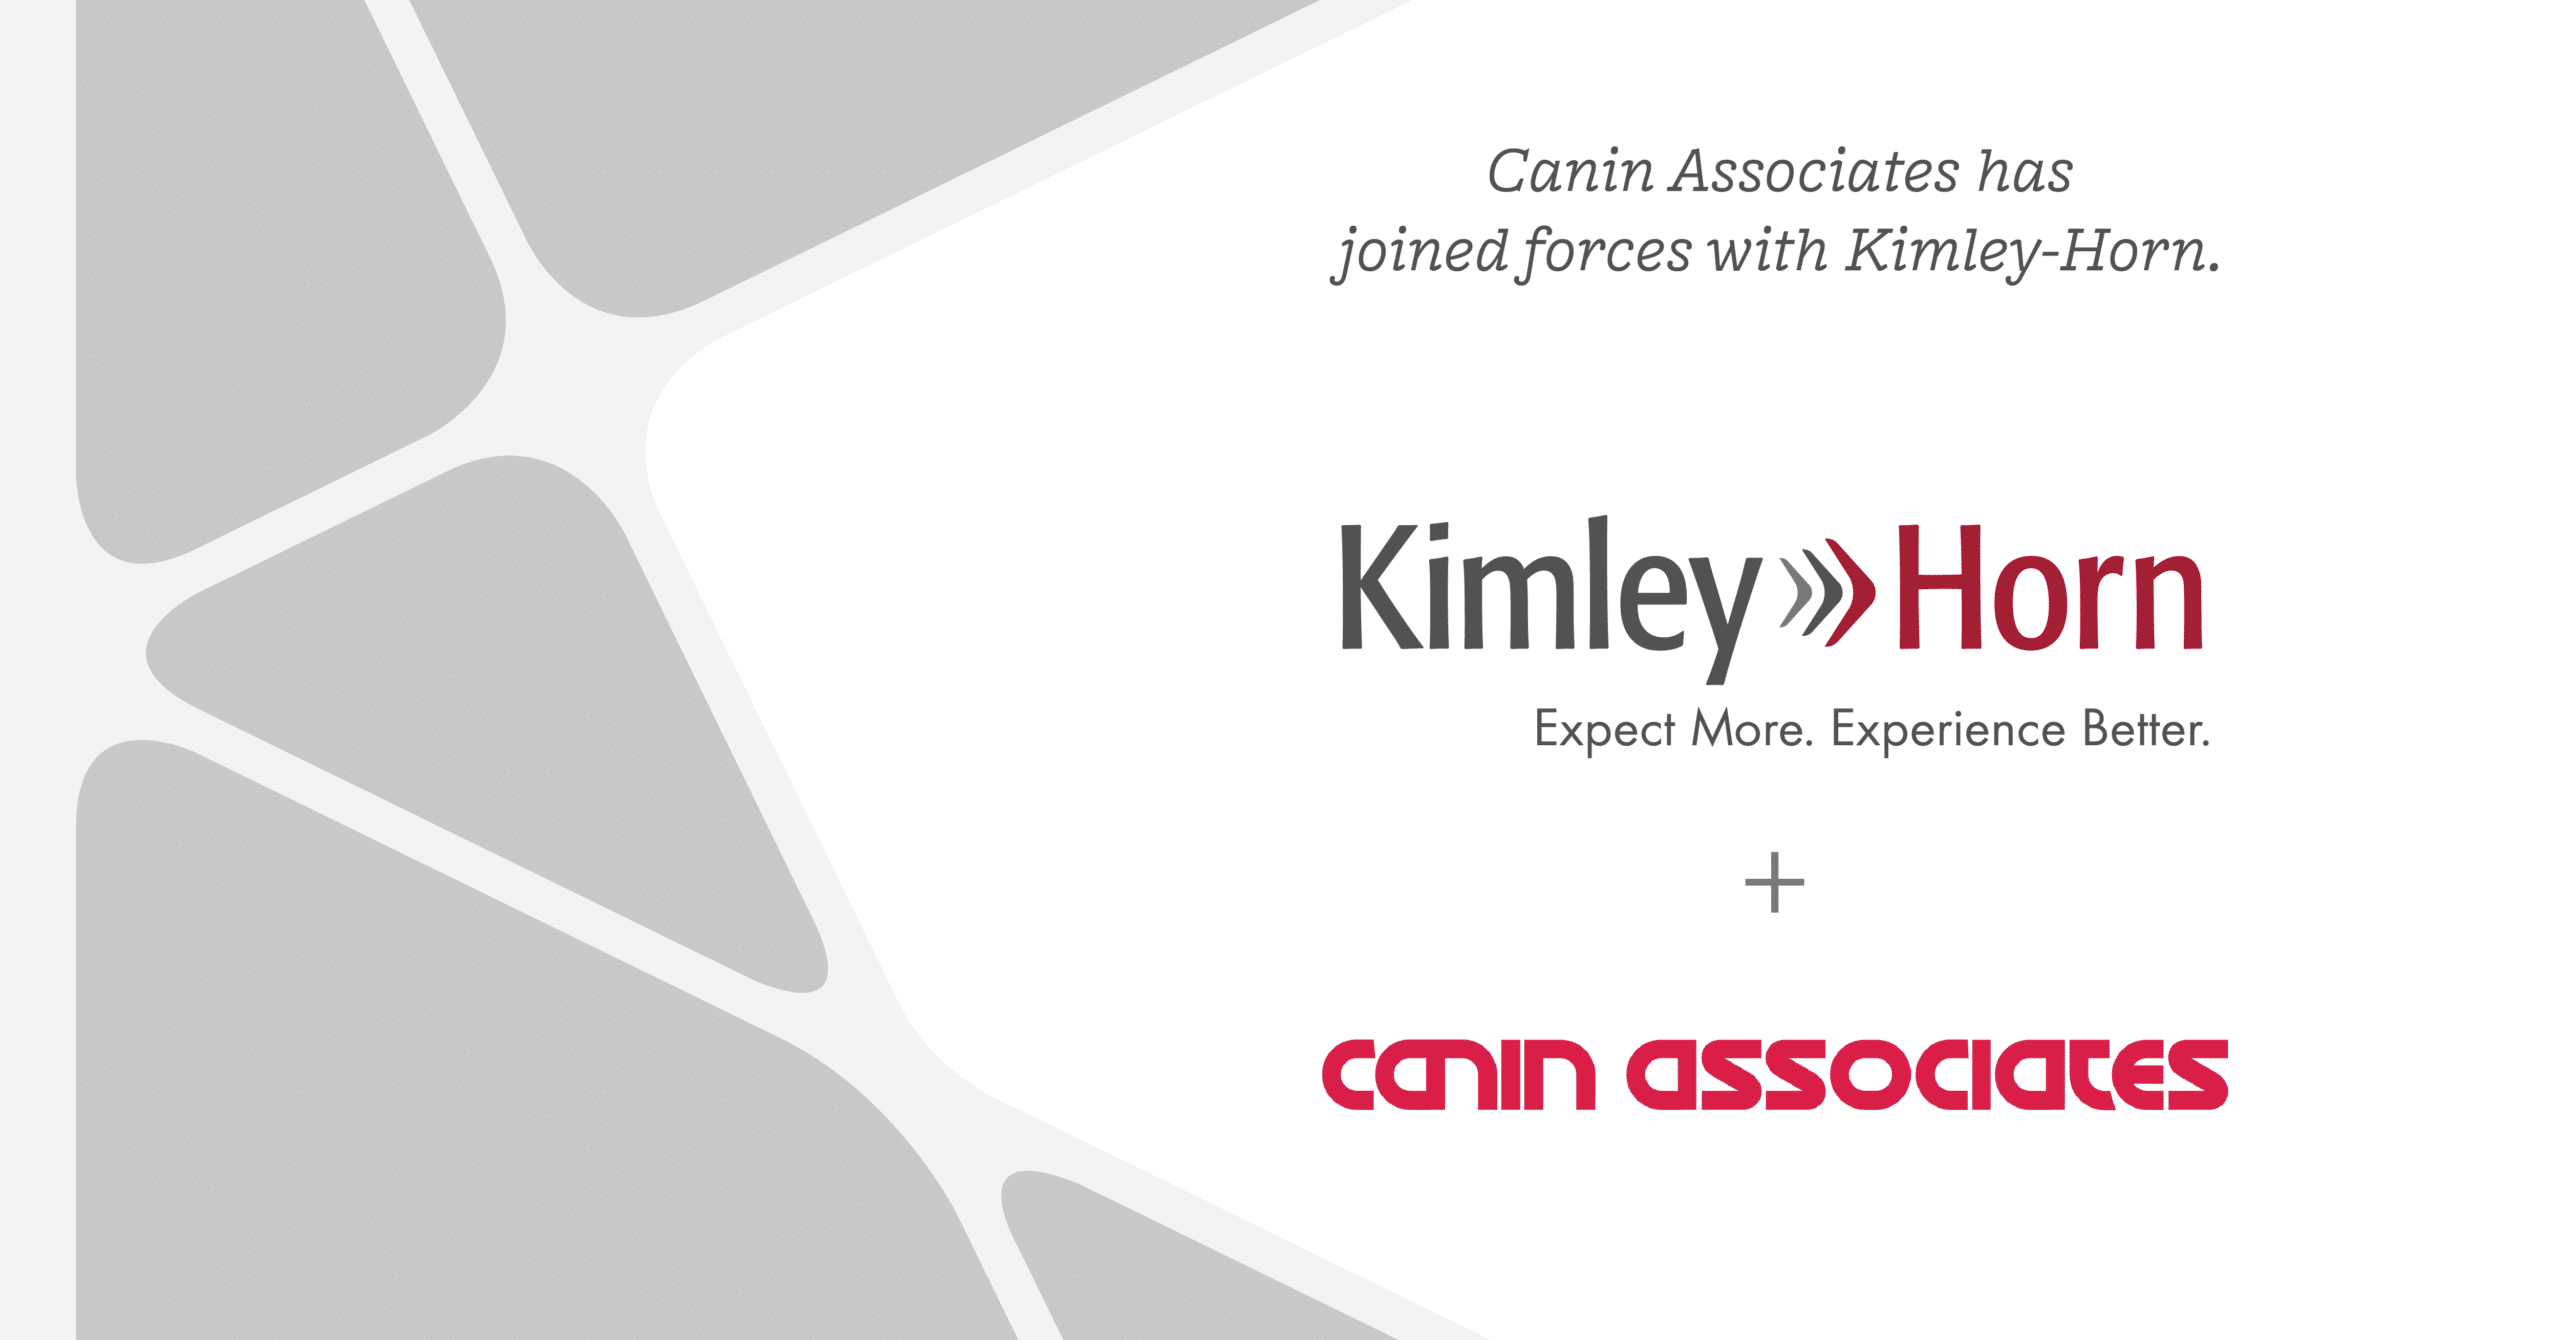 Cannon Associates Joins forces with Kimley-Horn